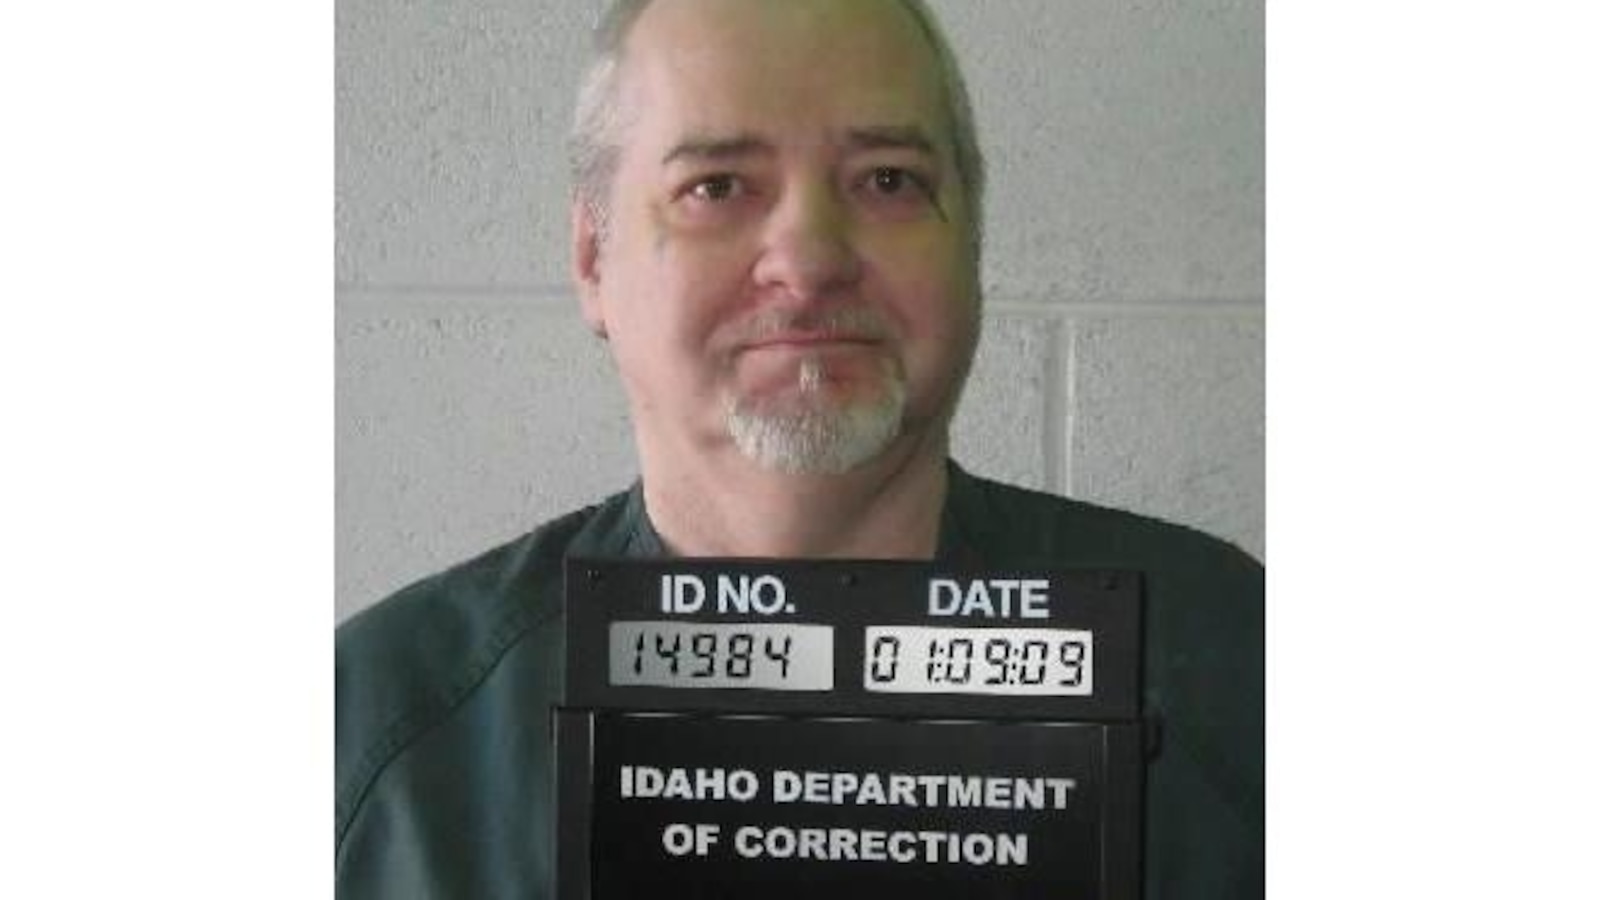 Idaho to Execute Long-Time Death Row Inmate, Serial Killer Known for Poetry